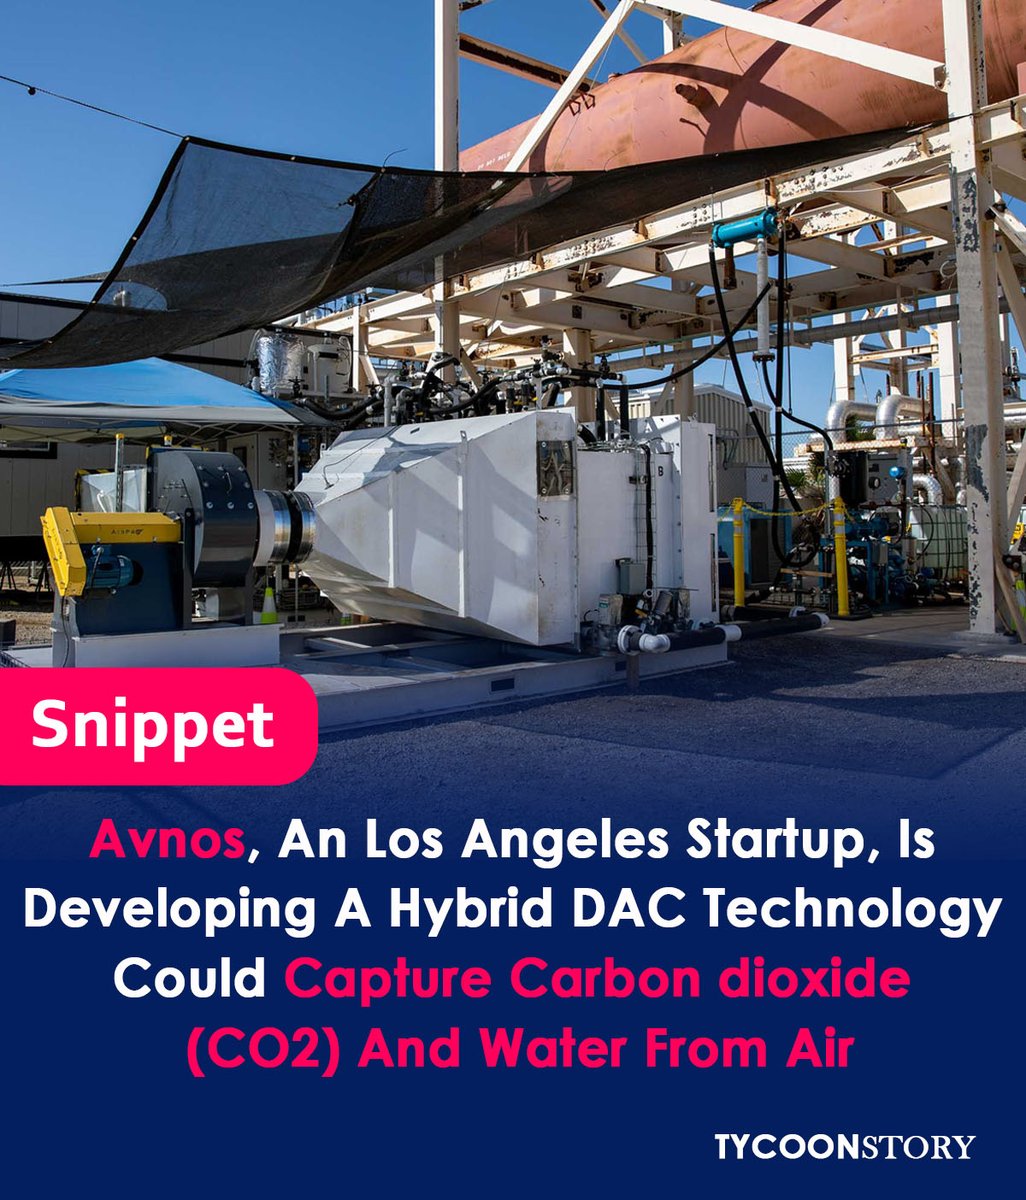 Avnos is testing a machine that can extract CO2 and water from the air
#hybridDAC #carboncapture #watercapture #climateaction #sustainability #renewableenergy #greenfuture #environment #technology #cleantech #climatechange #Avnos #DAC